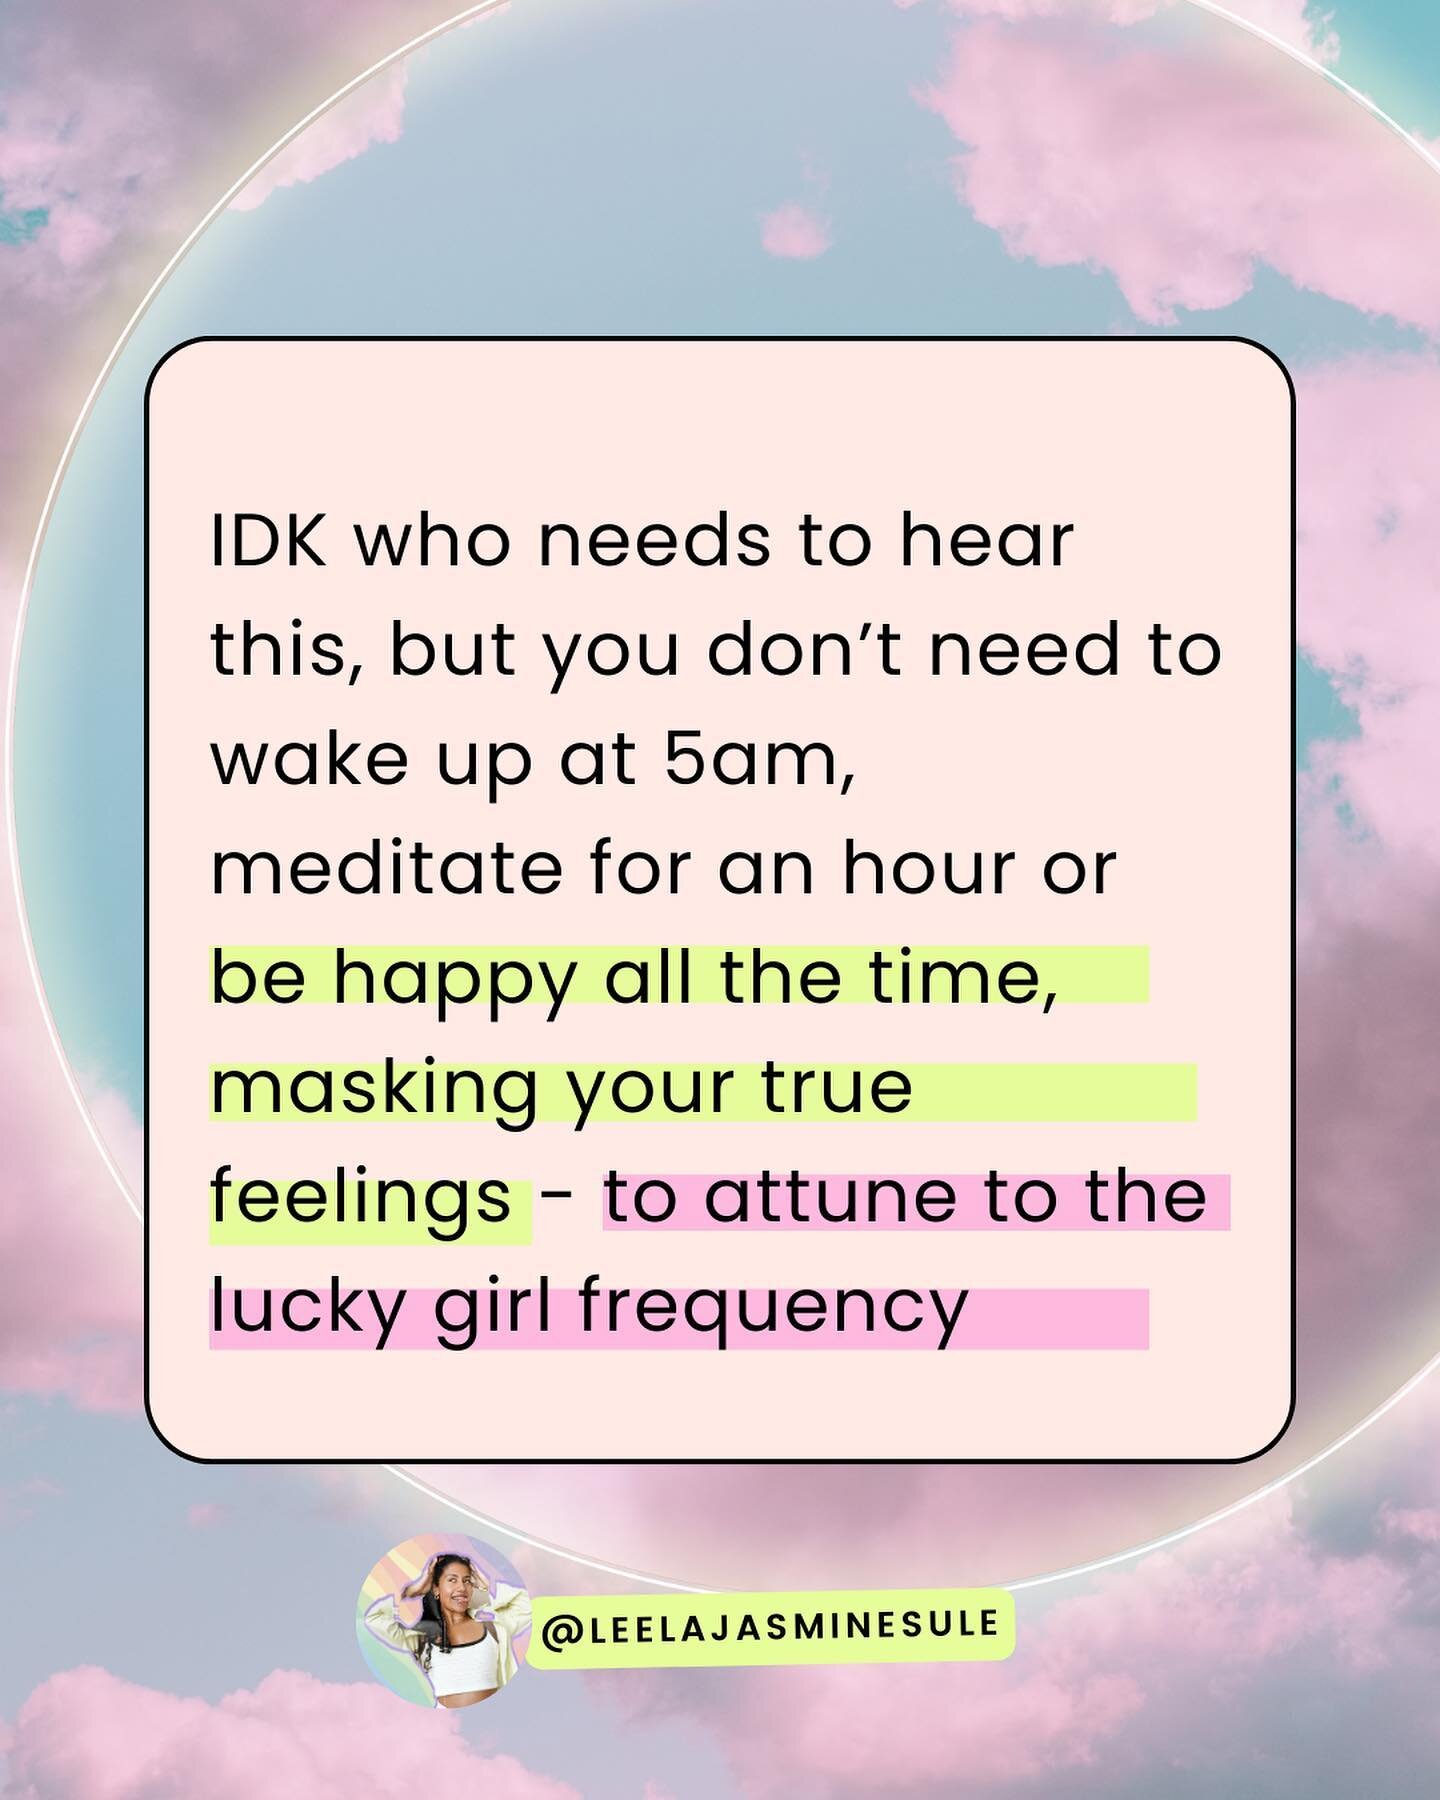 Last day to get into ✨THE LUCKY GIRL FREQUENCY✨ for &pound;22, before the price increases to &pound;44

When you join this, you will:

💦 Know the exact 3 steps to take daily, that will put you at the lucky girl frequency; so that everything working 